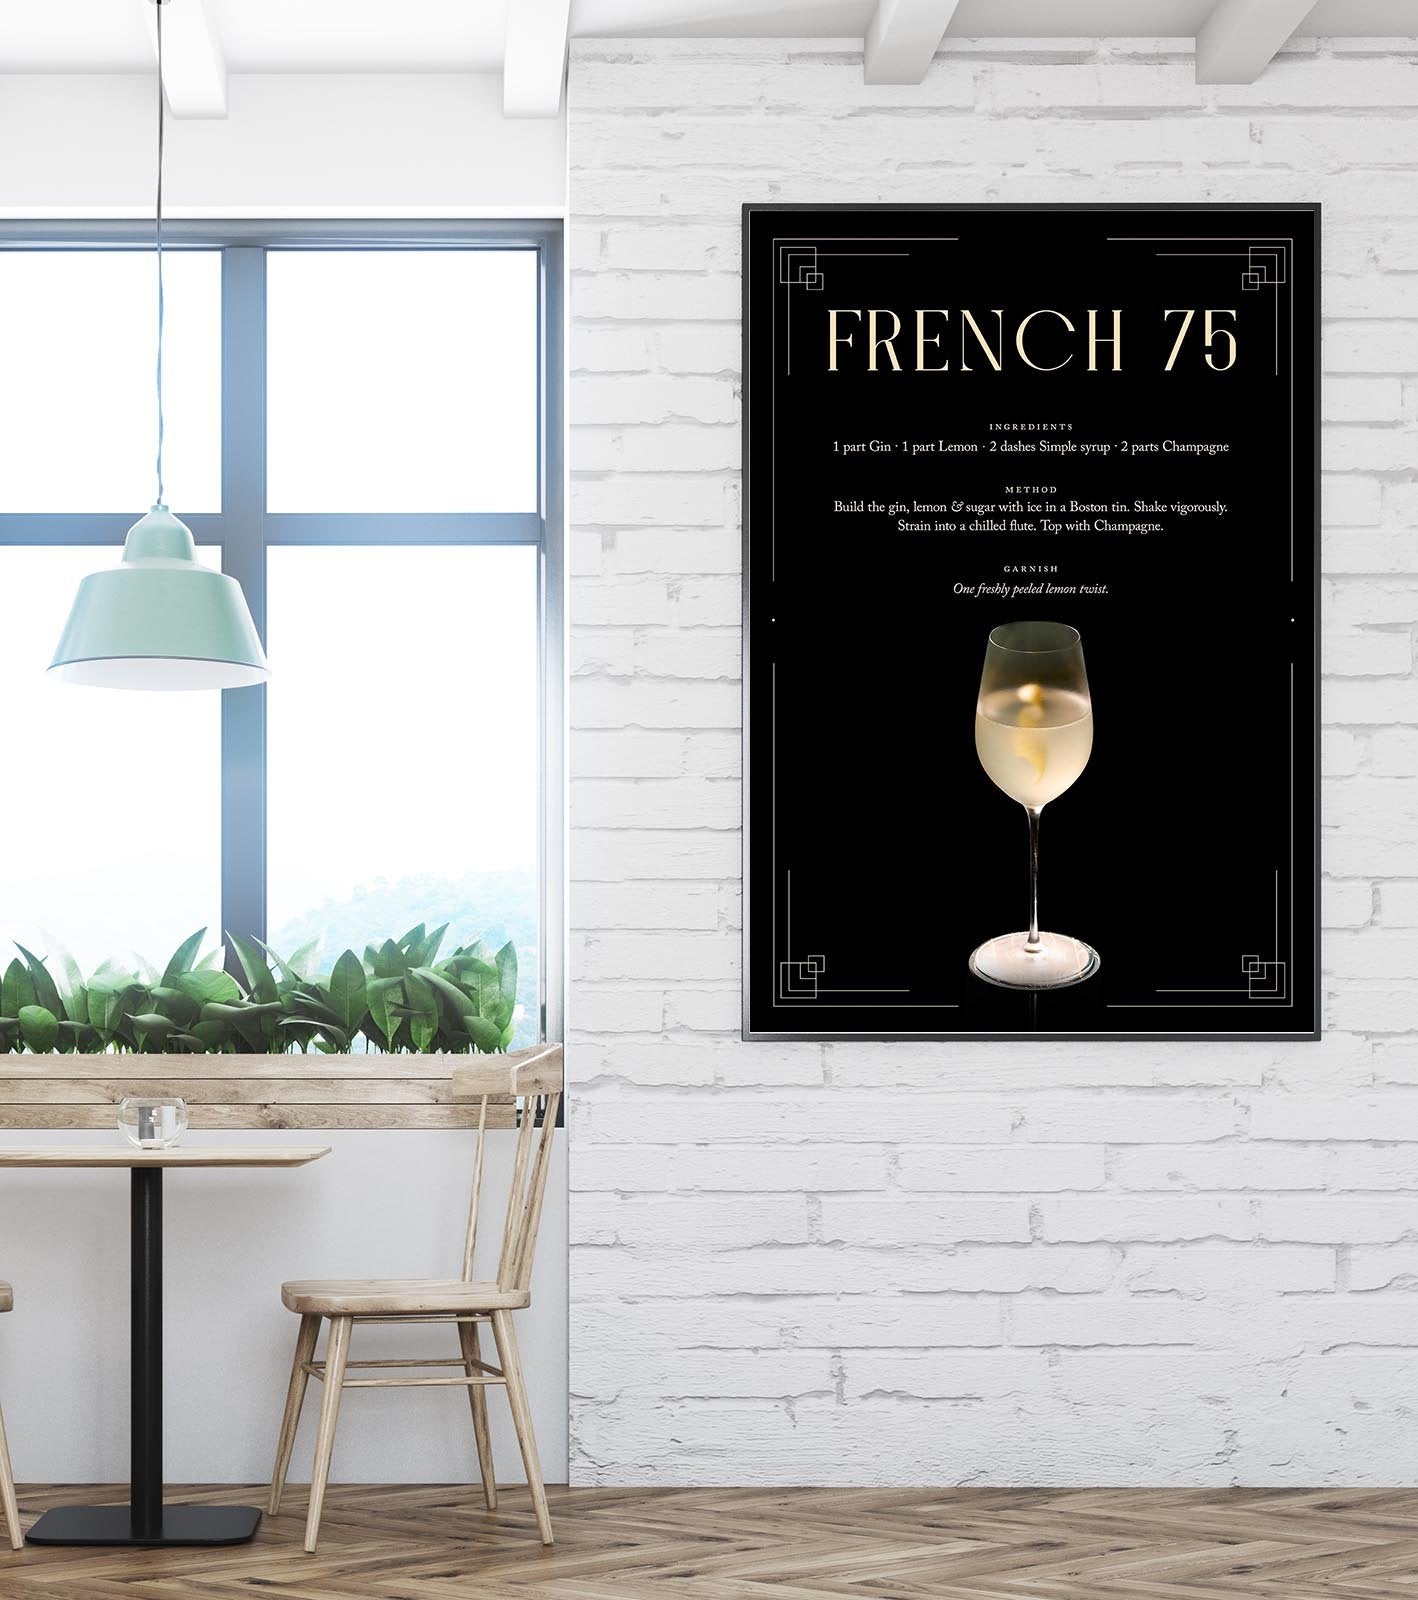 French 75 Cocktail Recipe Poster